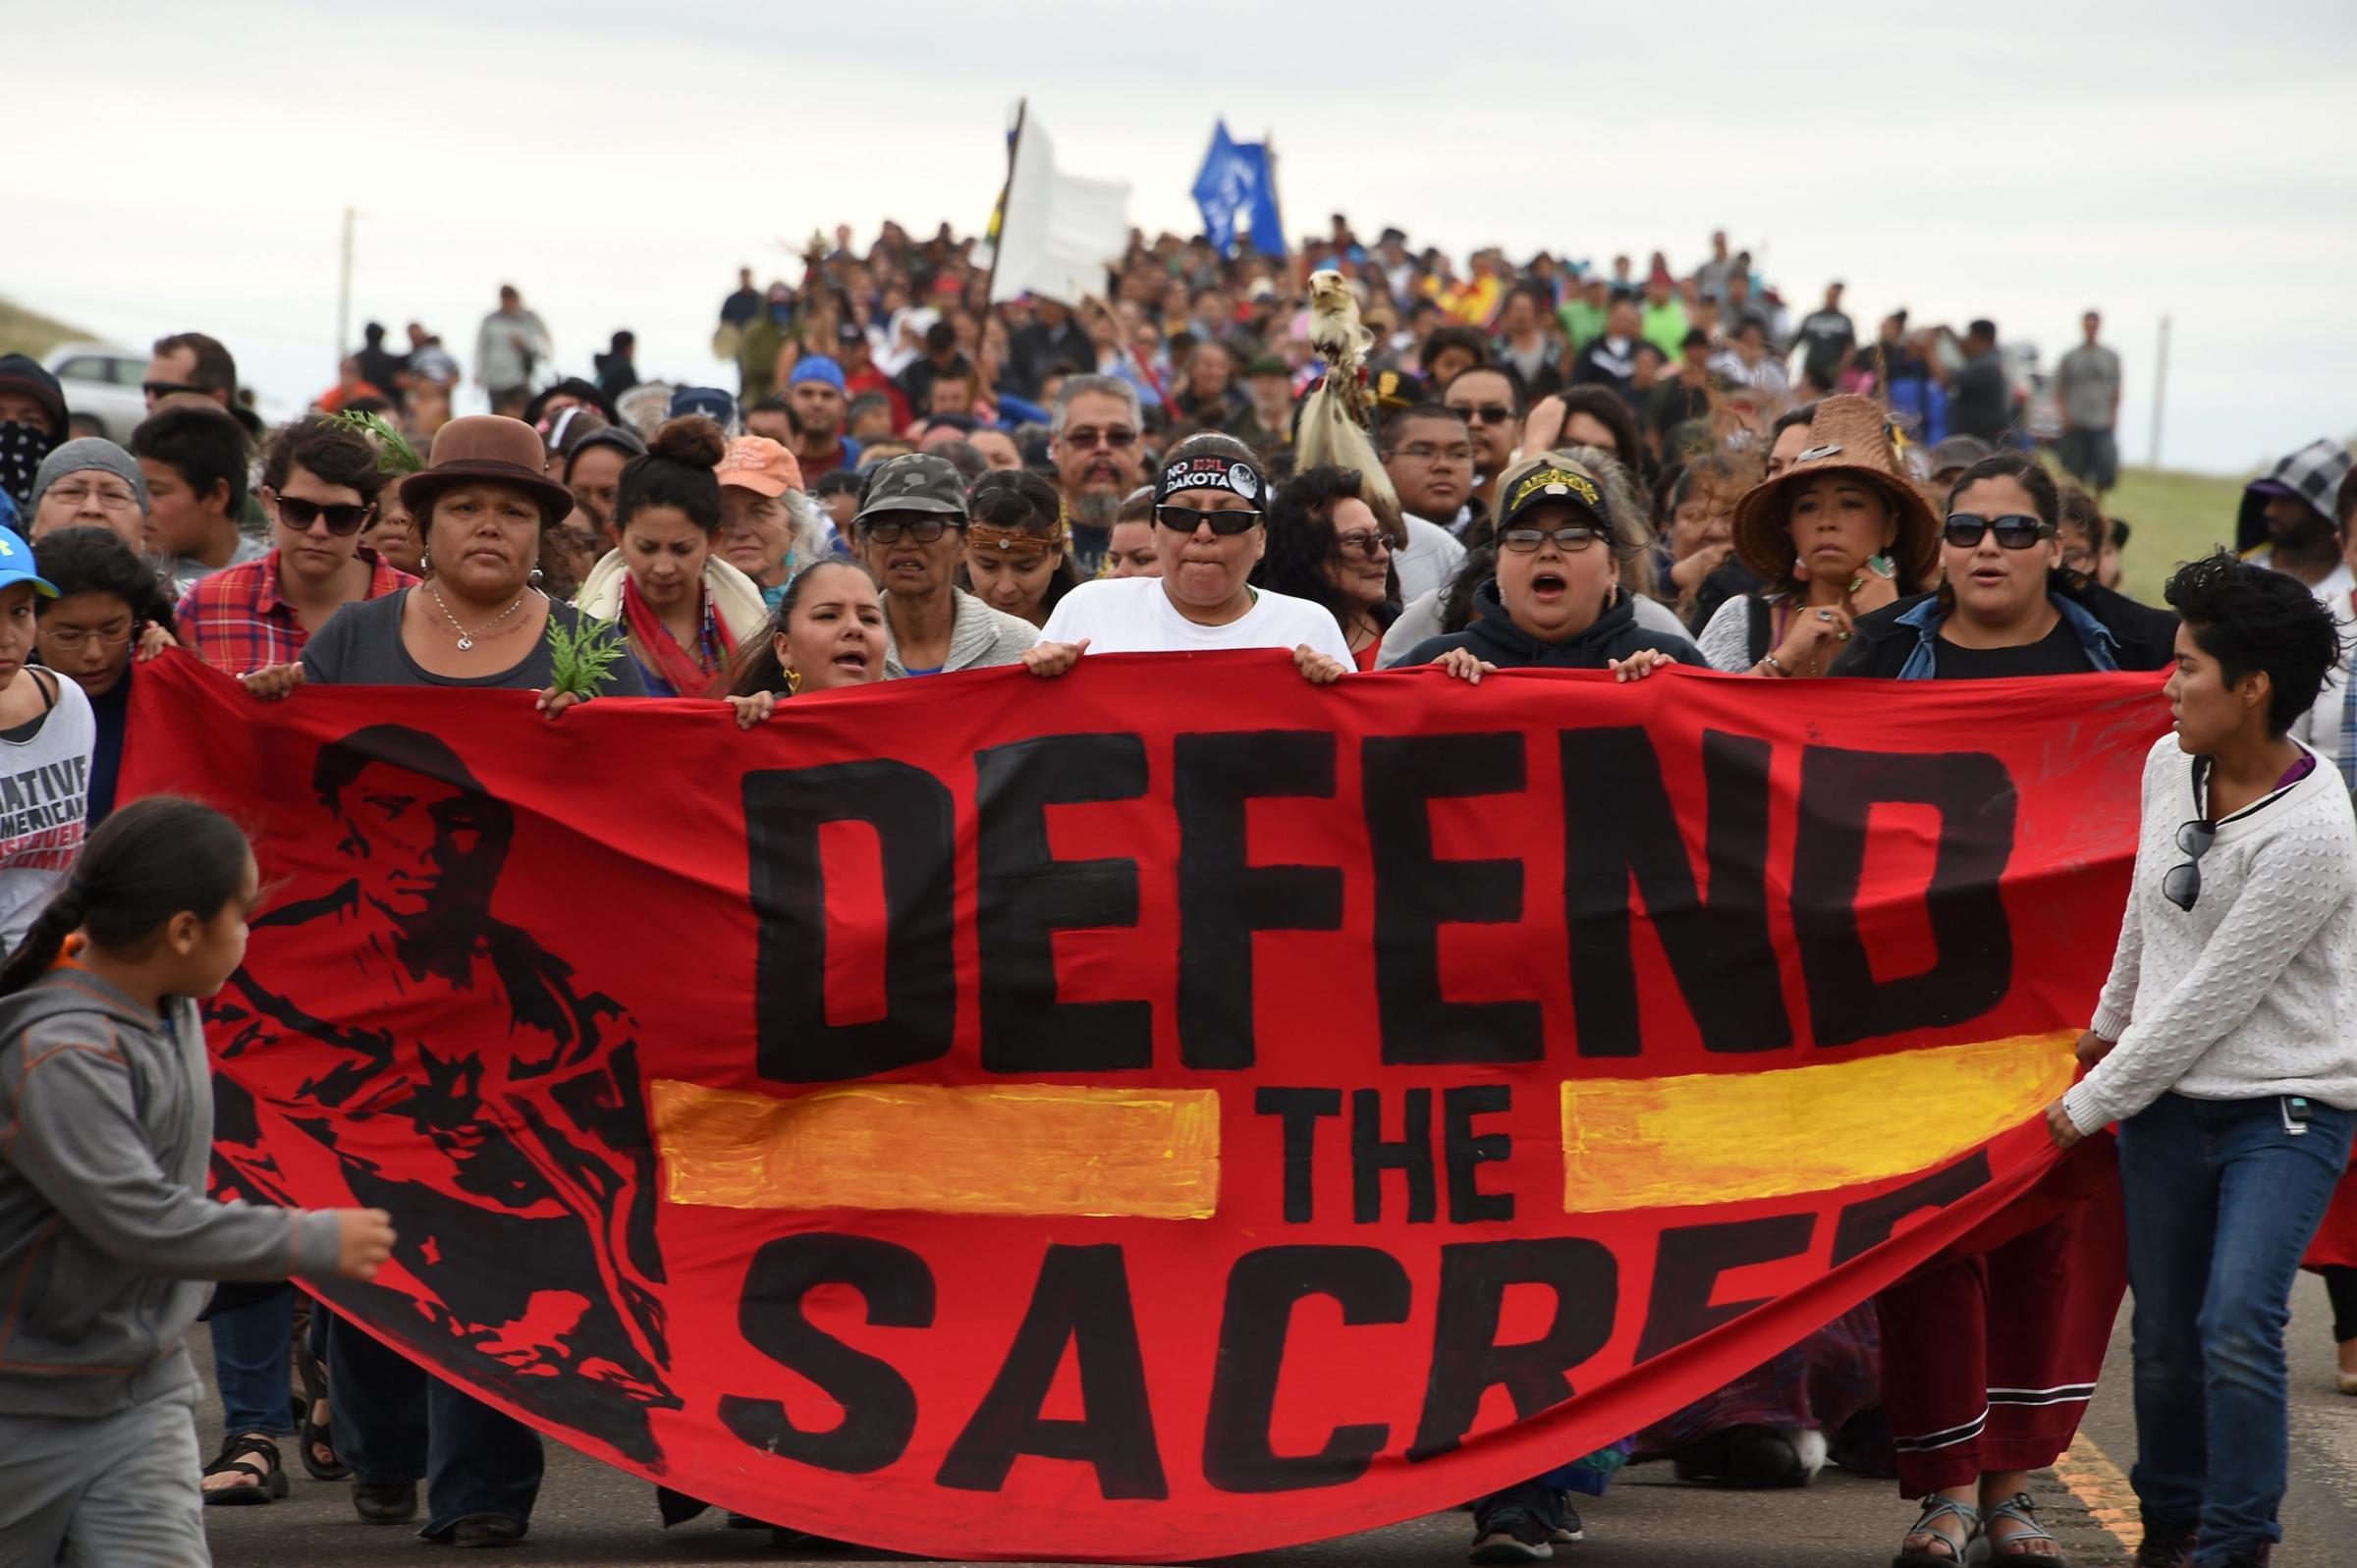 Native Americans march to a burial ground sacred site that was disturbed by bulldozers building the Dakota Access Pipeline (DAPL), near the encampment where hundreds of people have gathered to join the Standing Rock Sioux Tribe's protest of the oil pipeline that is slated to cross the Missouri River near Cannon Ball, North Dakota Sept. 4, 2016.